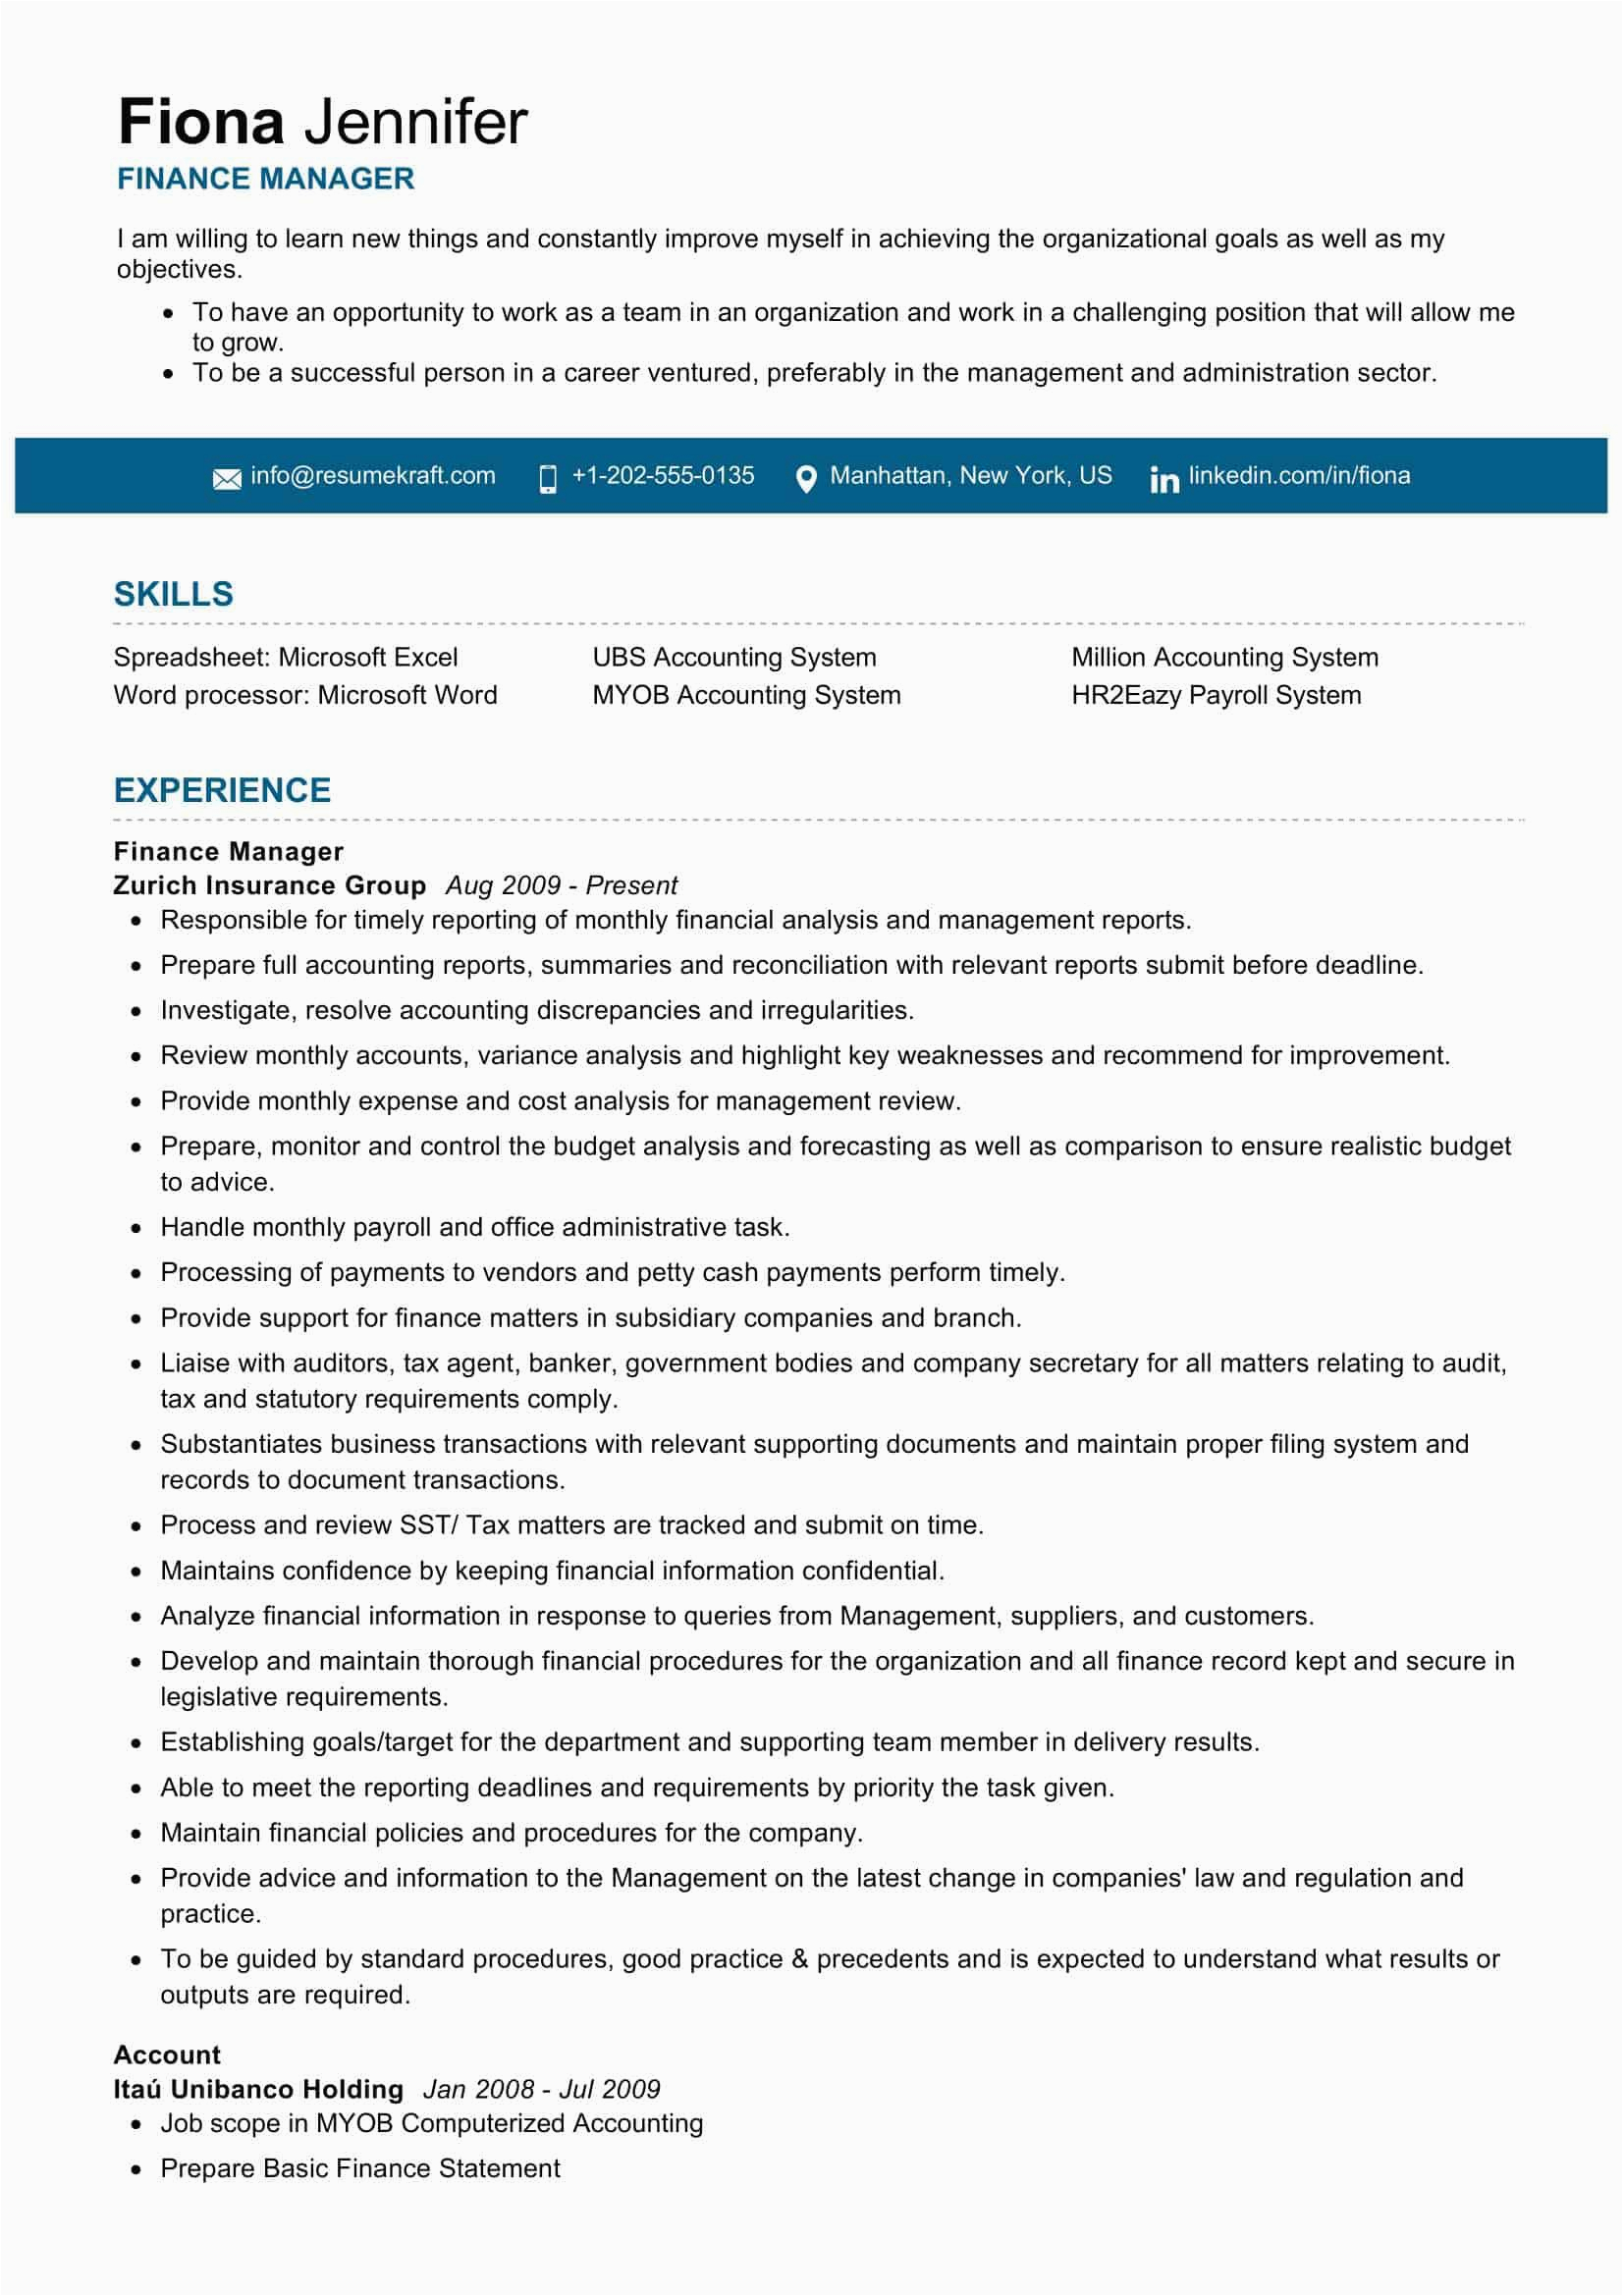 Finance and Administration Manager Resume Sample Finance Manager Resume Sample 2021